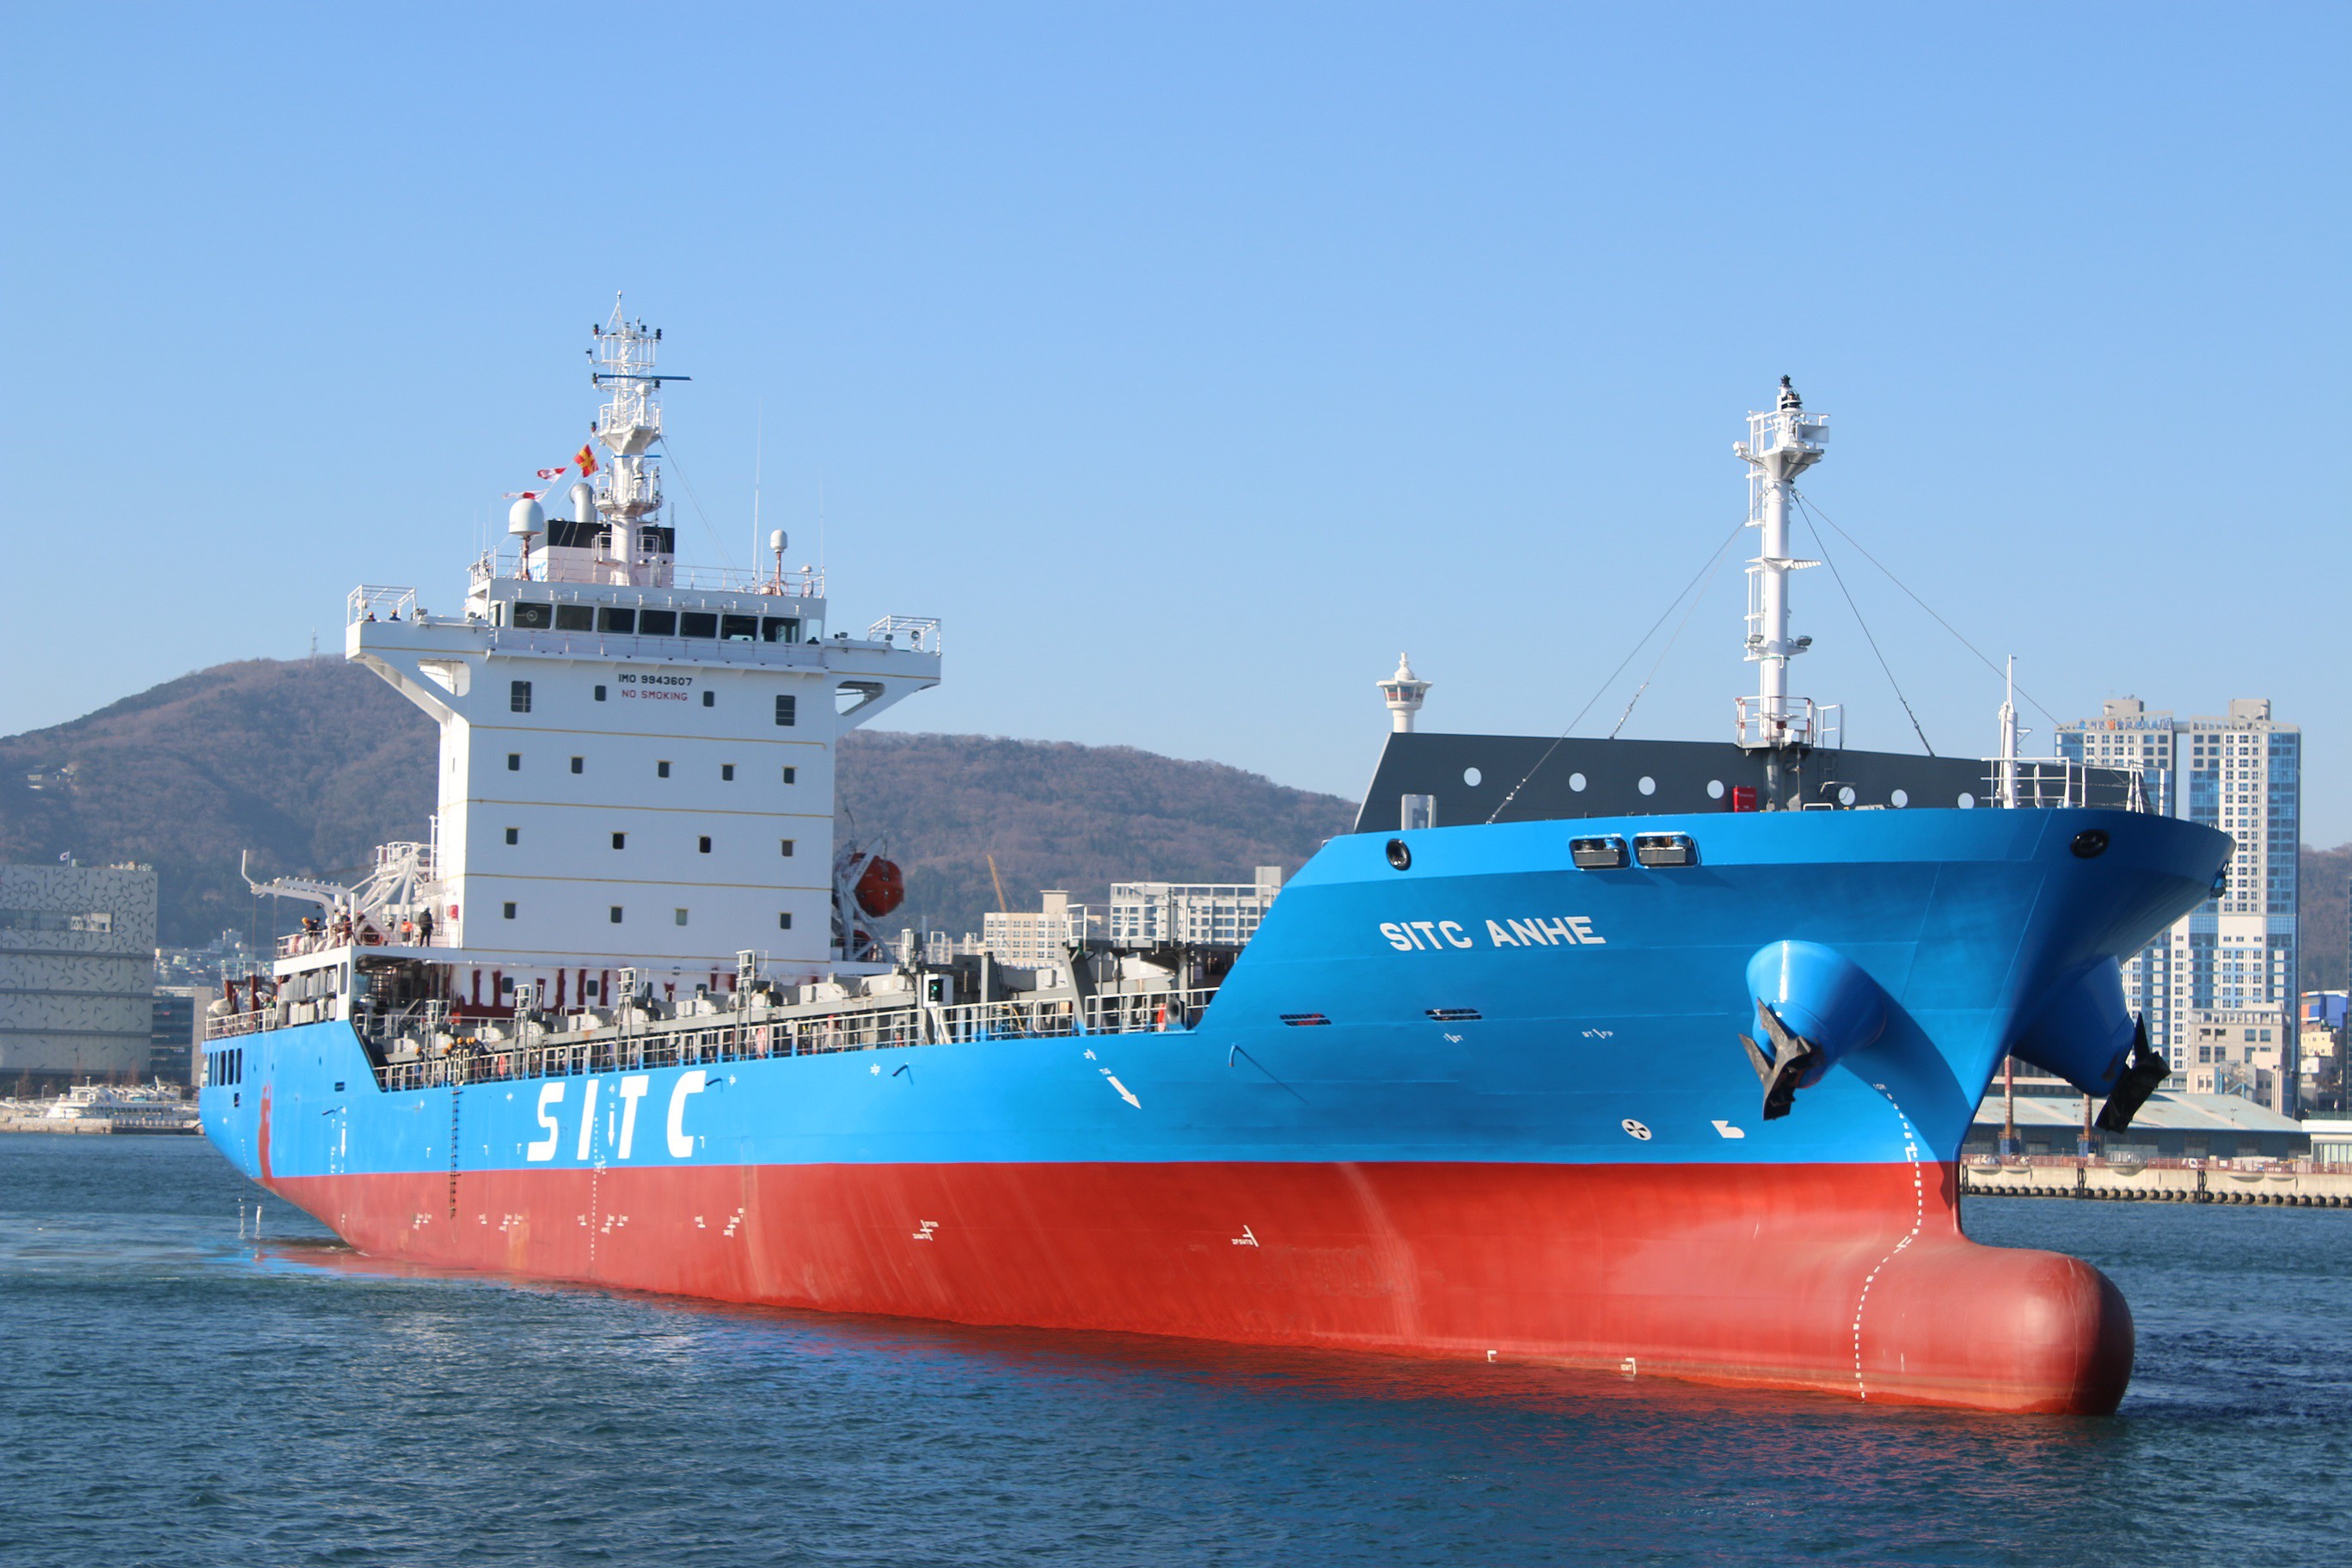 The Successful Delivery for M/V “SITC ANHE”